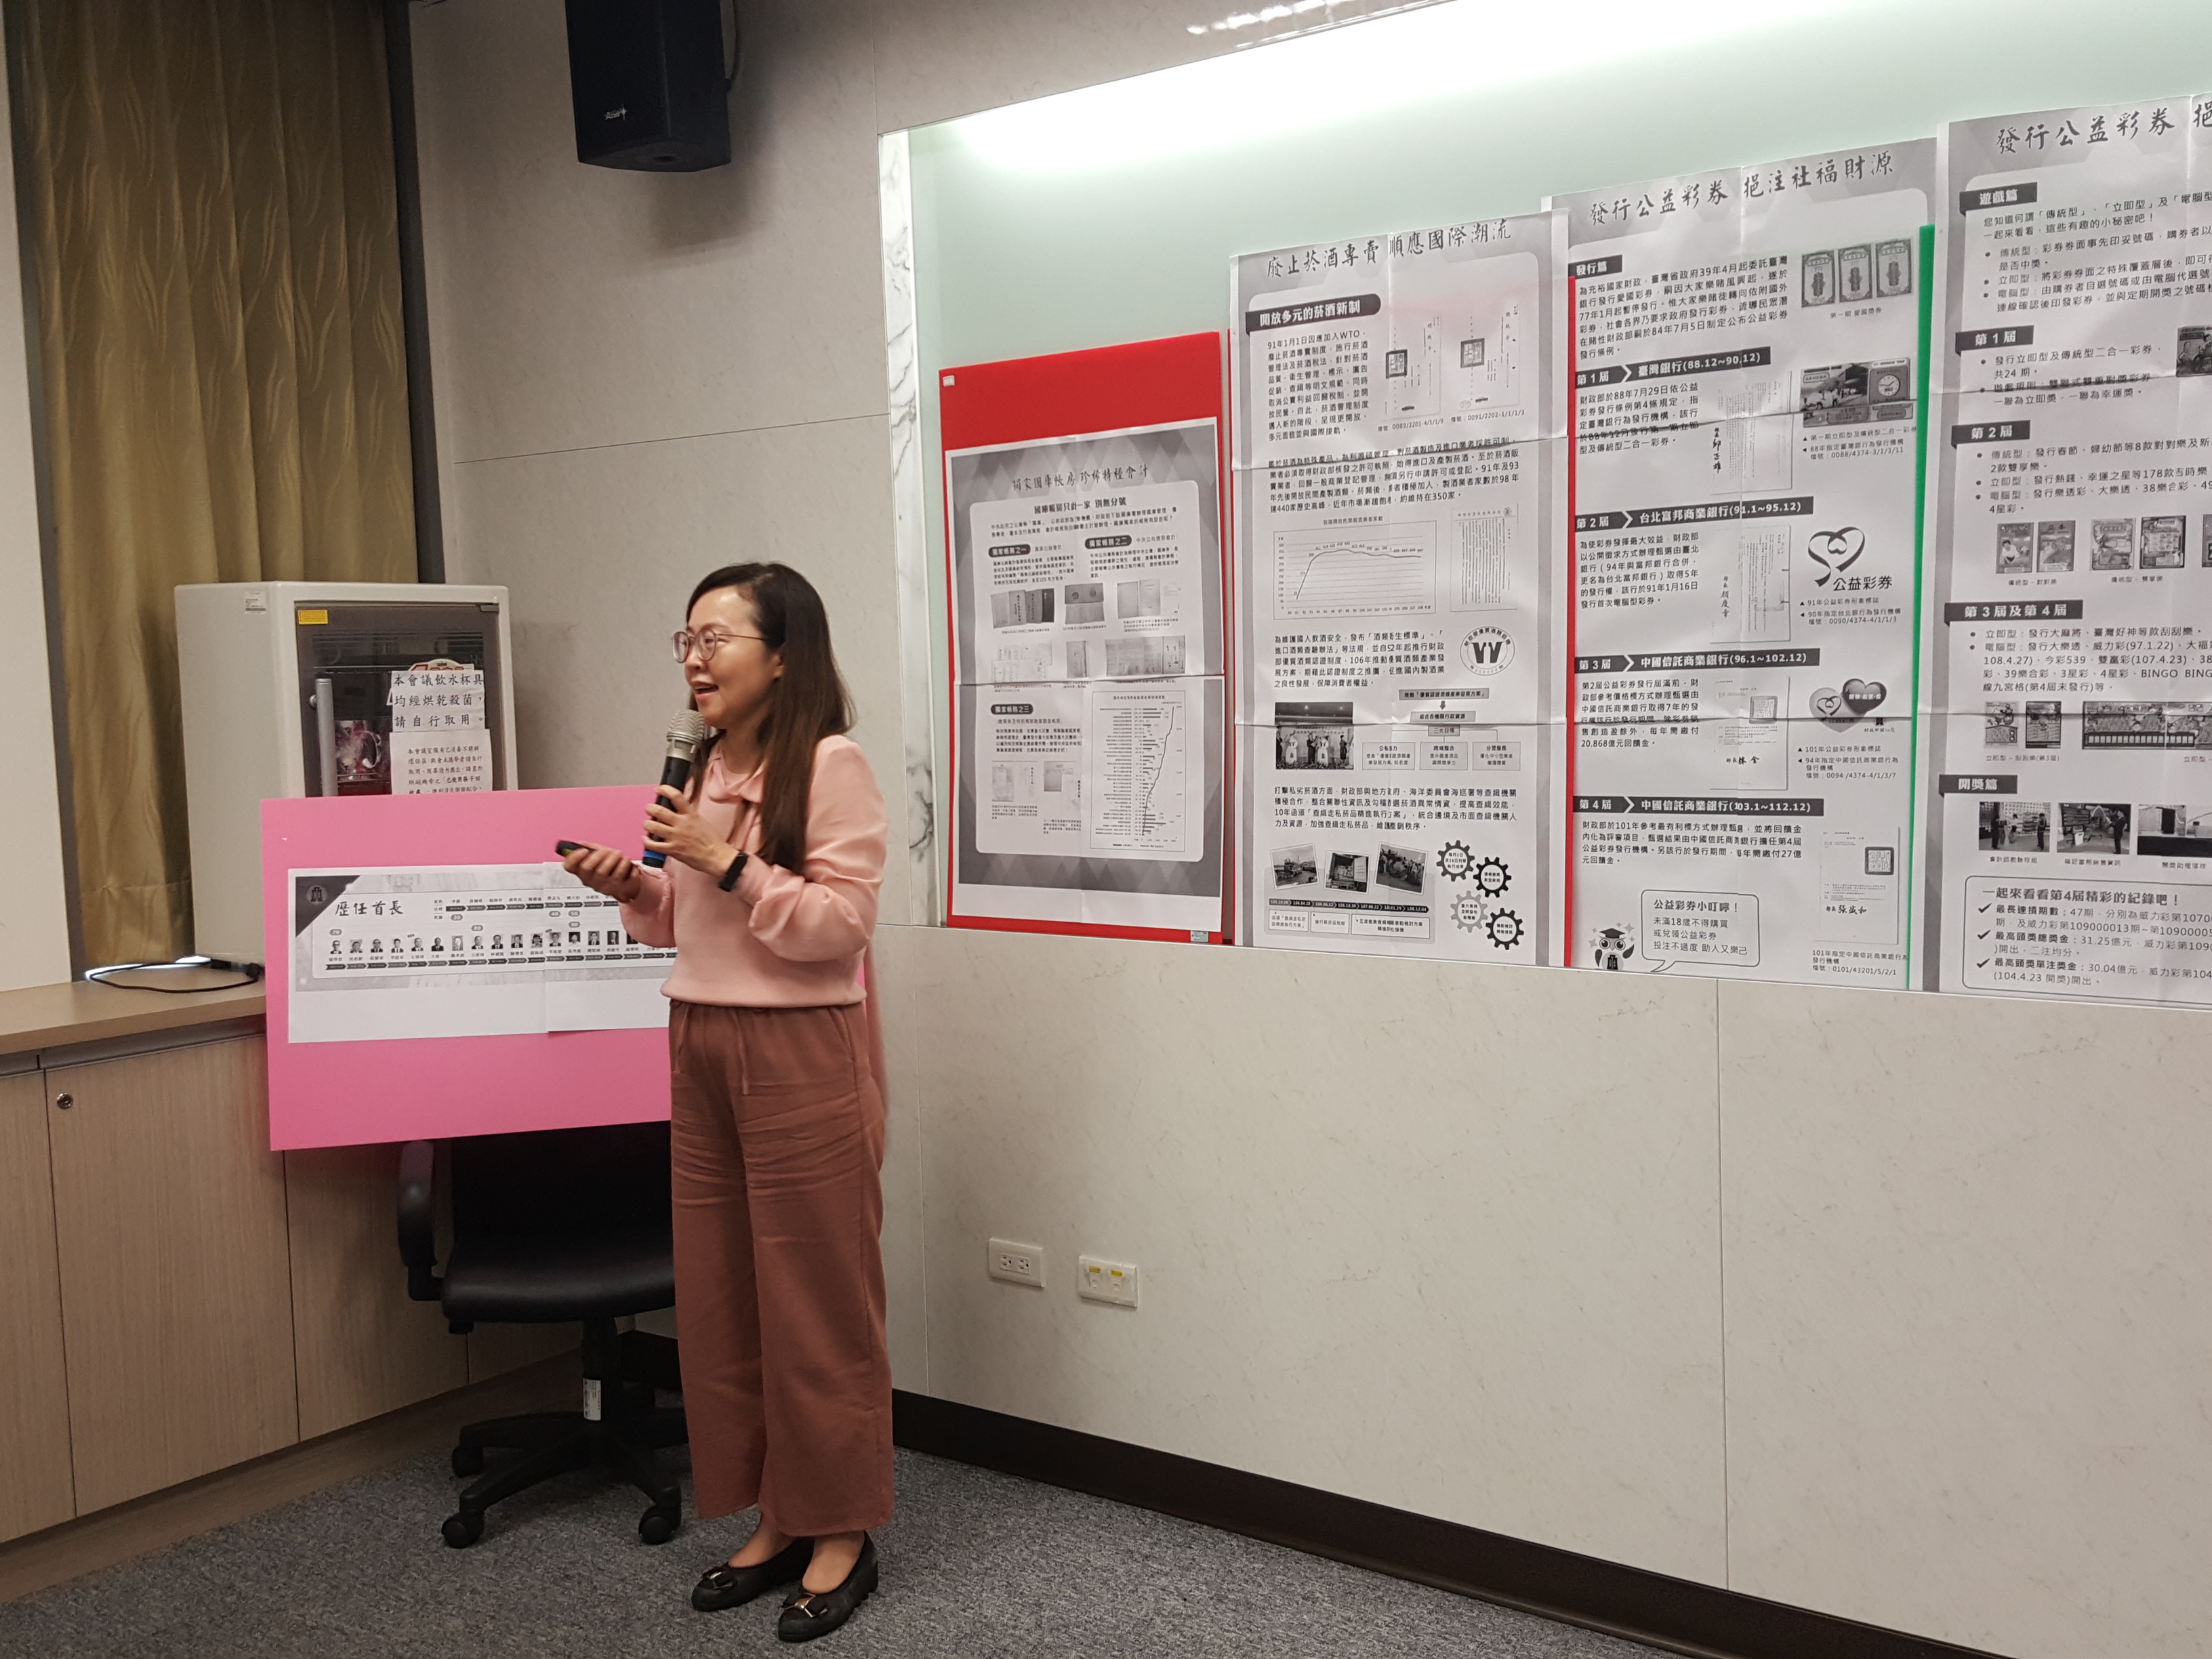 Picture 4: Ms. Chan, Hui-Chun, Section Chief of the National Treasury Administration, rehearses for the guided tour.